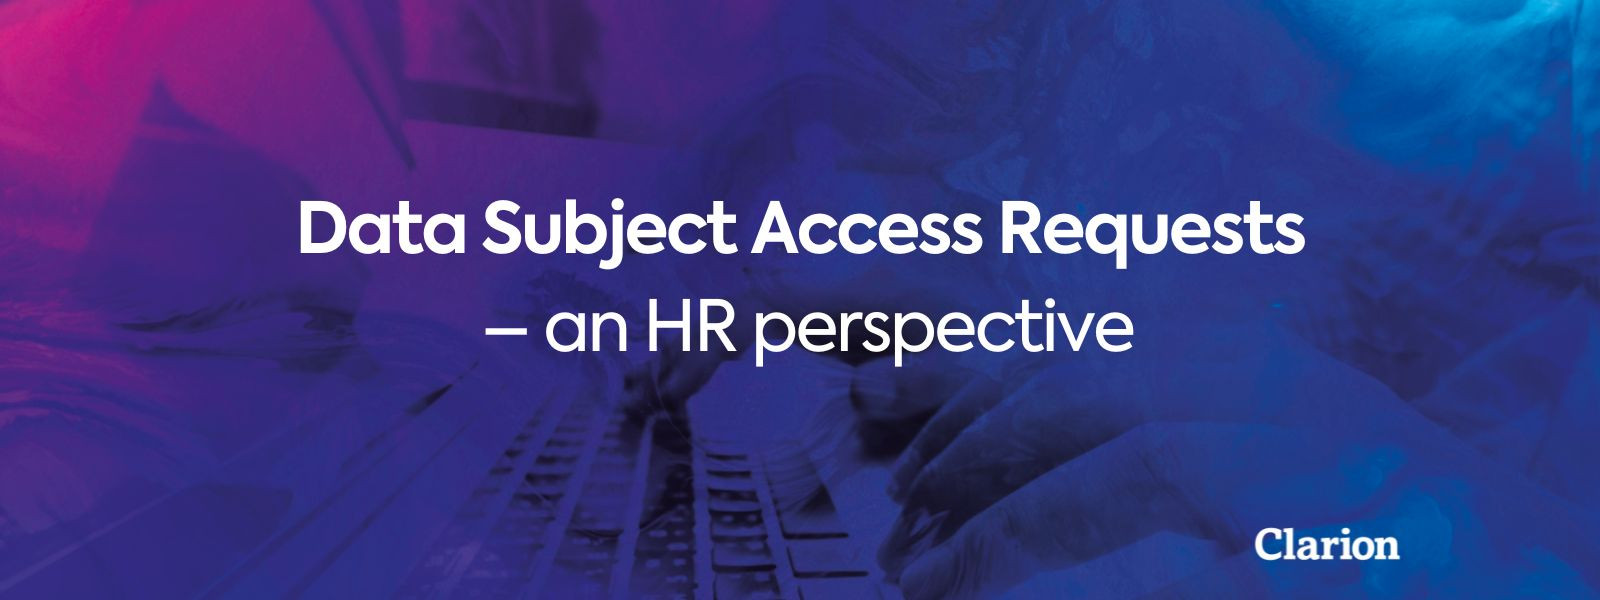 Data Subject Access Requests – an HR perspective